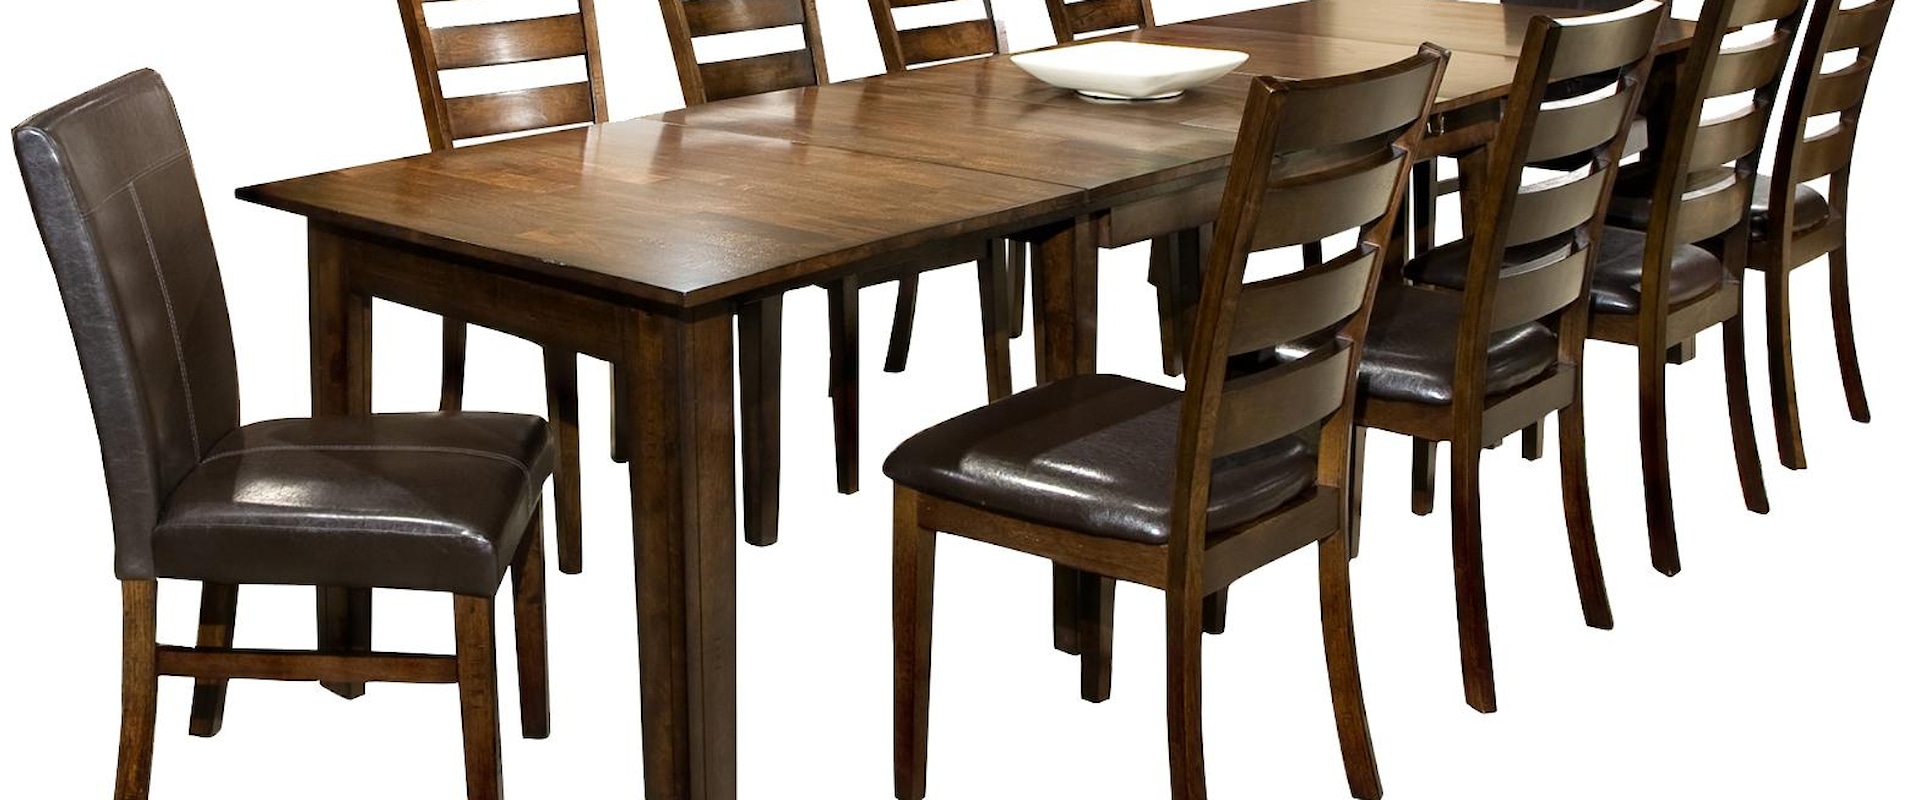 11-Piece Dining Set with Table and Chairs